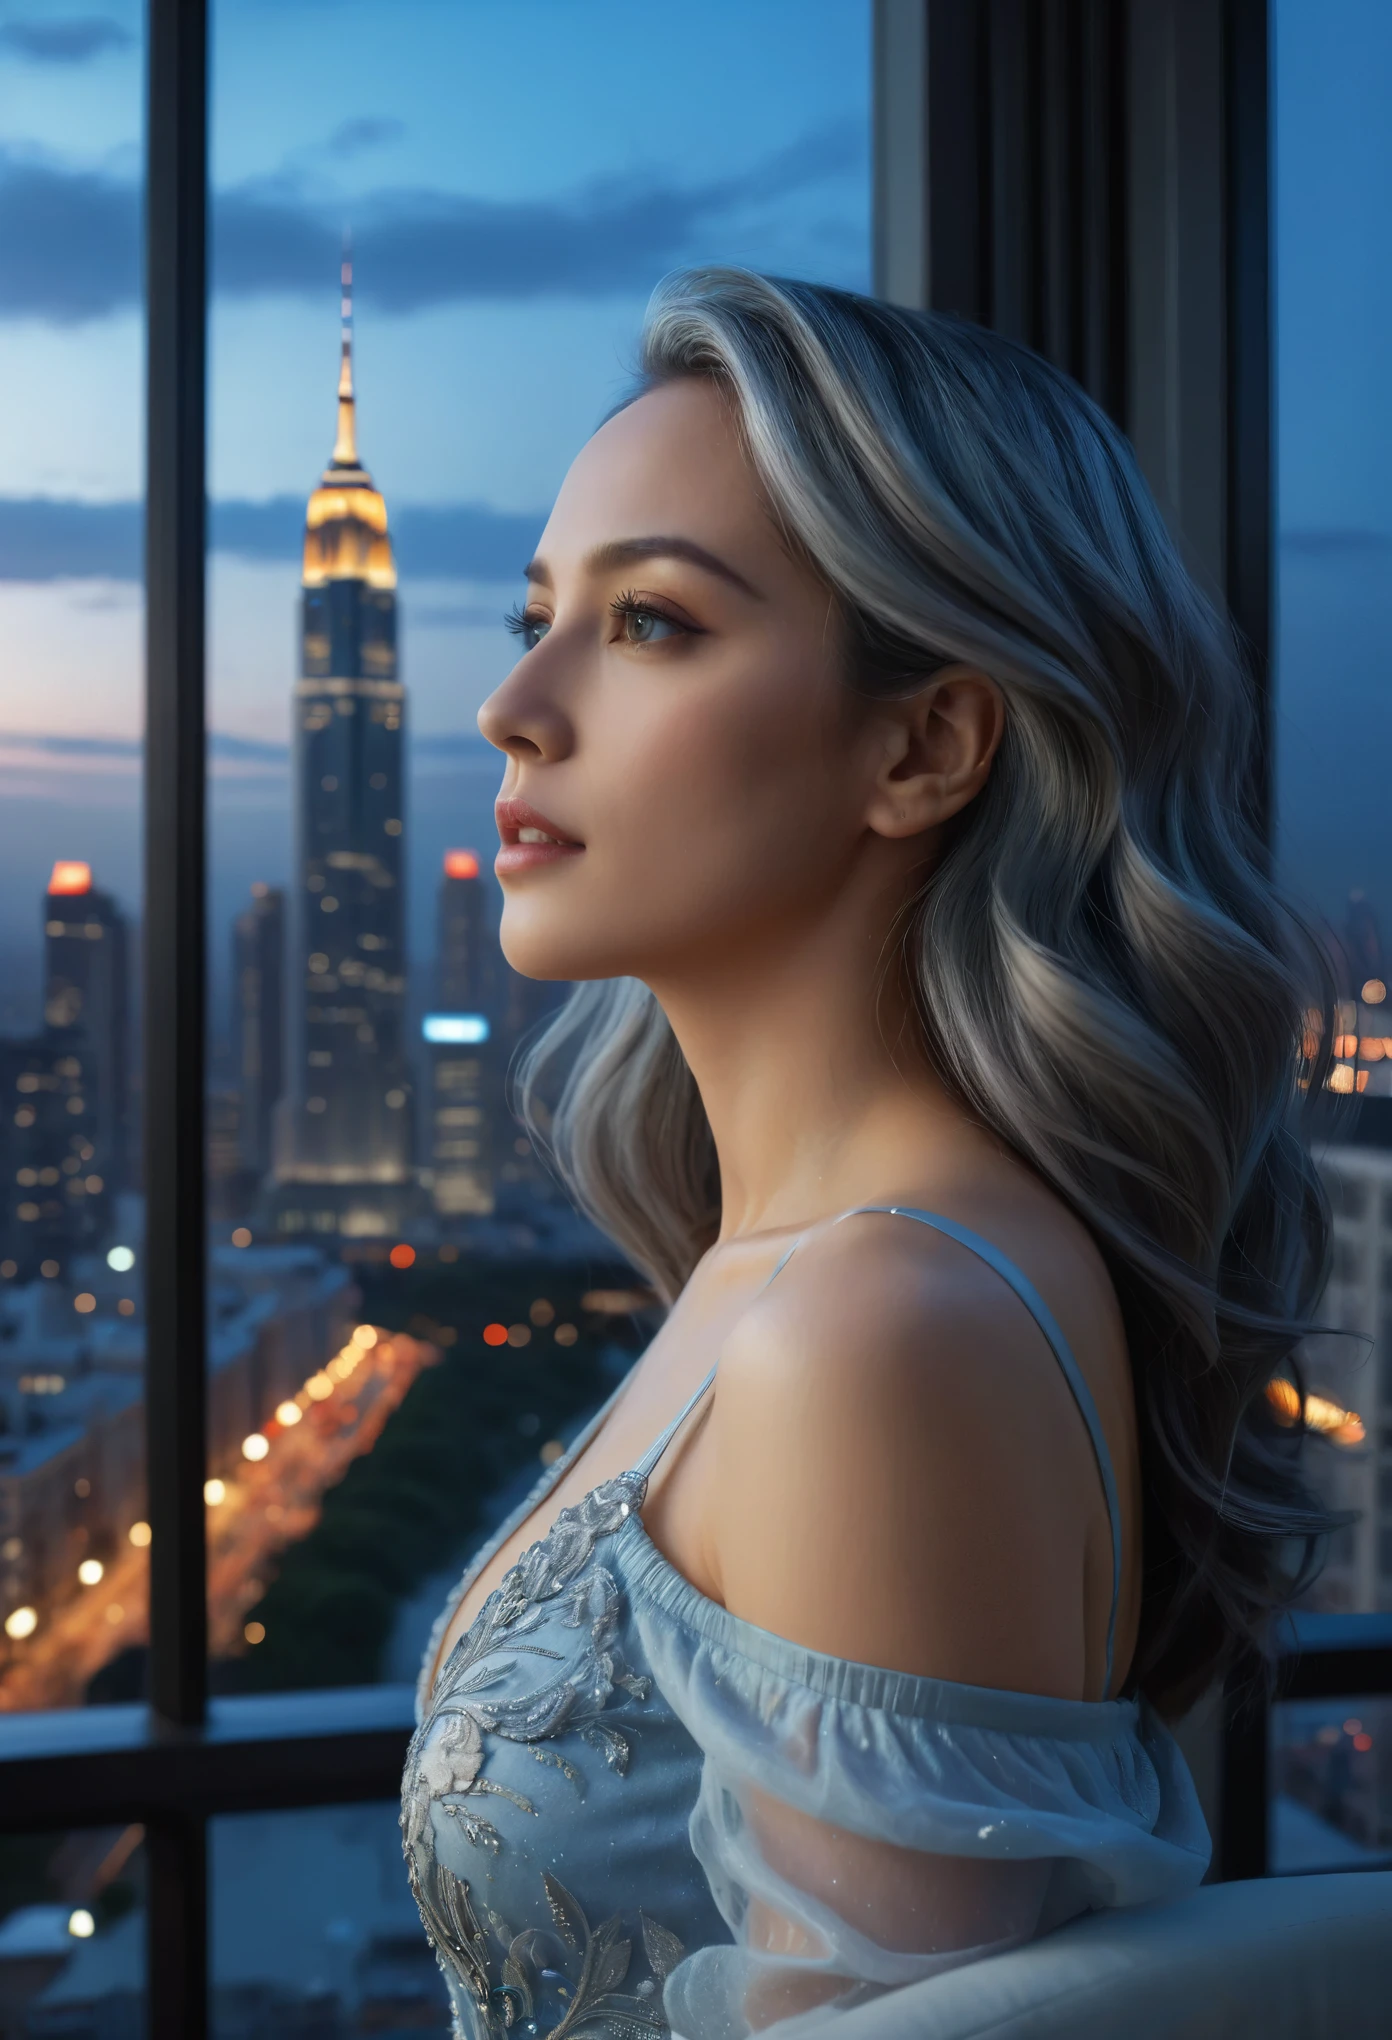 (best quality,4k,8k,highres,masterpiece:1.2),ultra-detailed,(Ultra-realistic, photorealistic,photo-realistic:1.37),a beautiful woman in a high-rise apartment, looking out the window at the night city skyline, her cyan eyes and bright gray hair framed by the city lights, a serene expression on her detailed, expressive face, dramatic lighting, (best quality,4k,8k,highres,masterpiece:1.2),ultra-detailed,(realistic,photorealistic,photo-realistic:1.37),portrait,cityscape,interior,window,city lights,highlights,dramatic lighting,cinematic